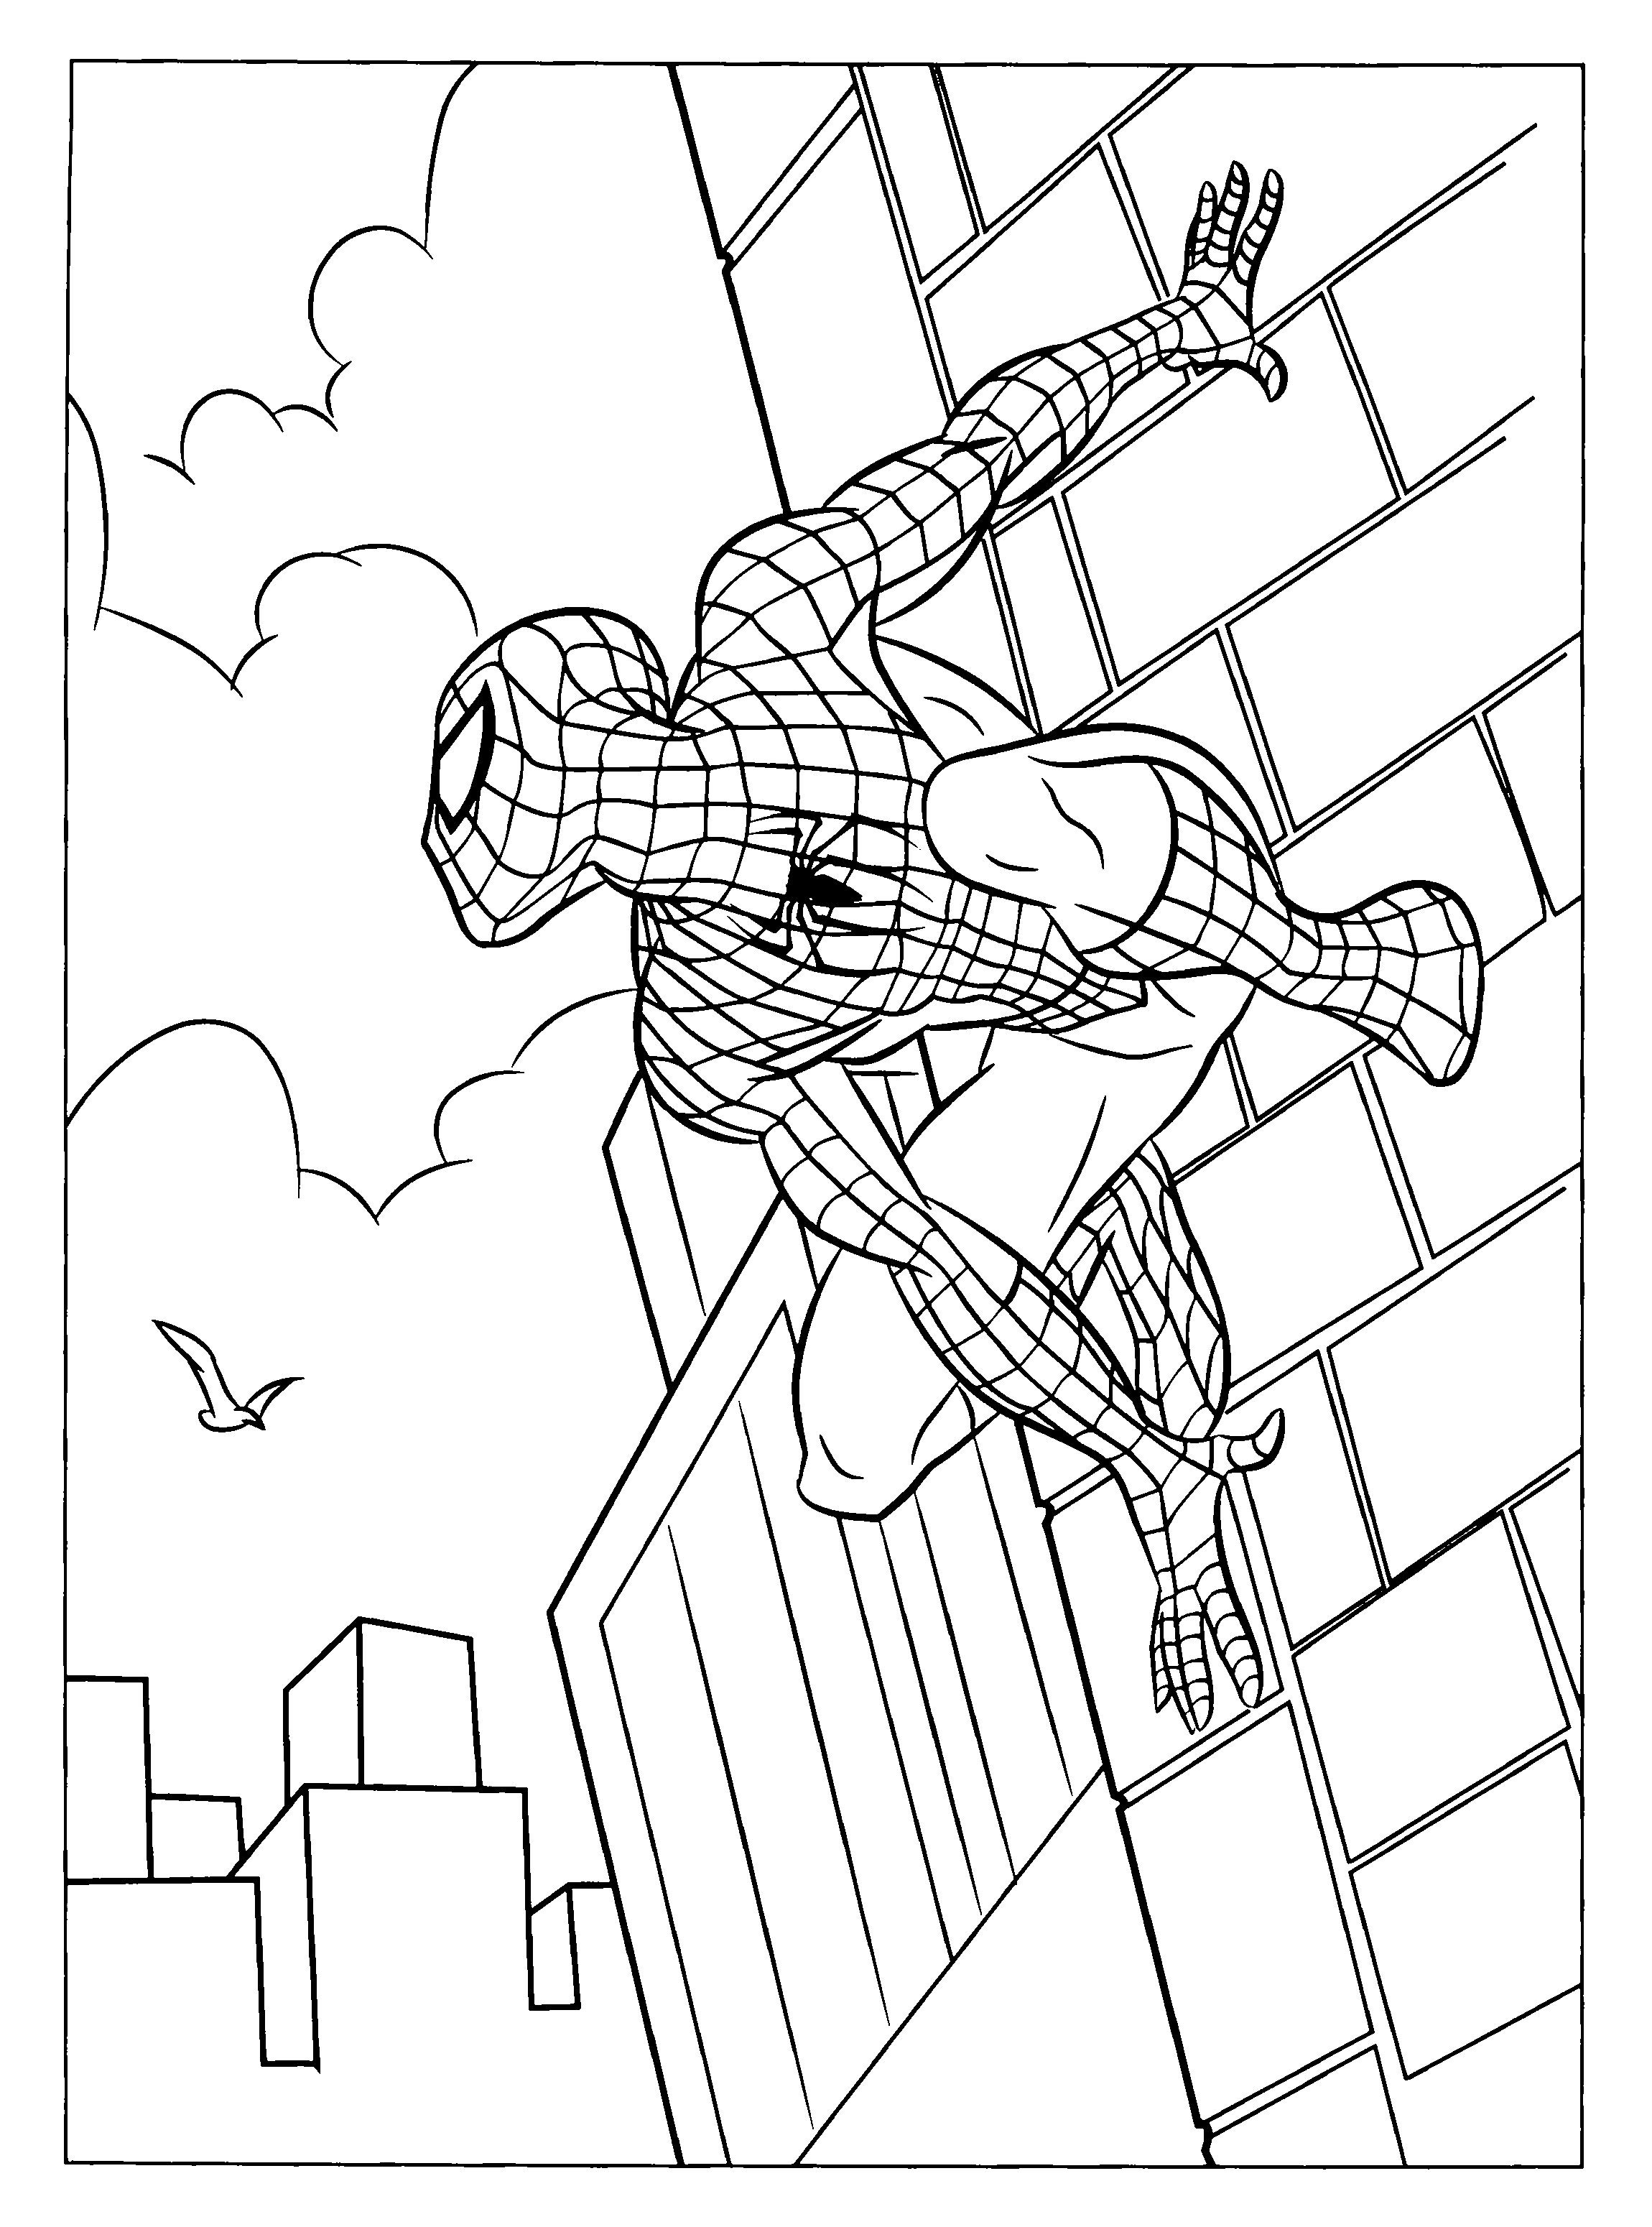 Spiderman 3 Coloring Pages Coloringpages1001